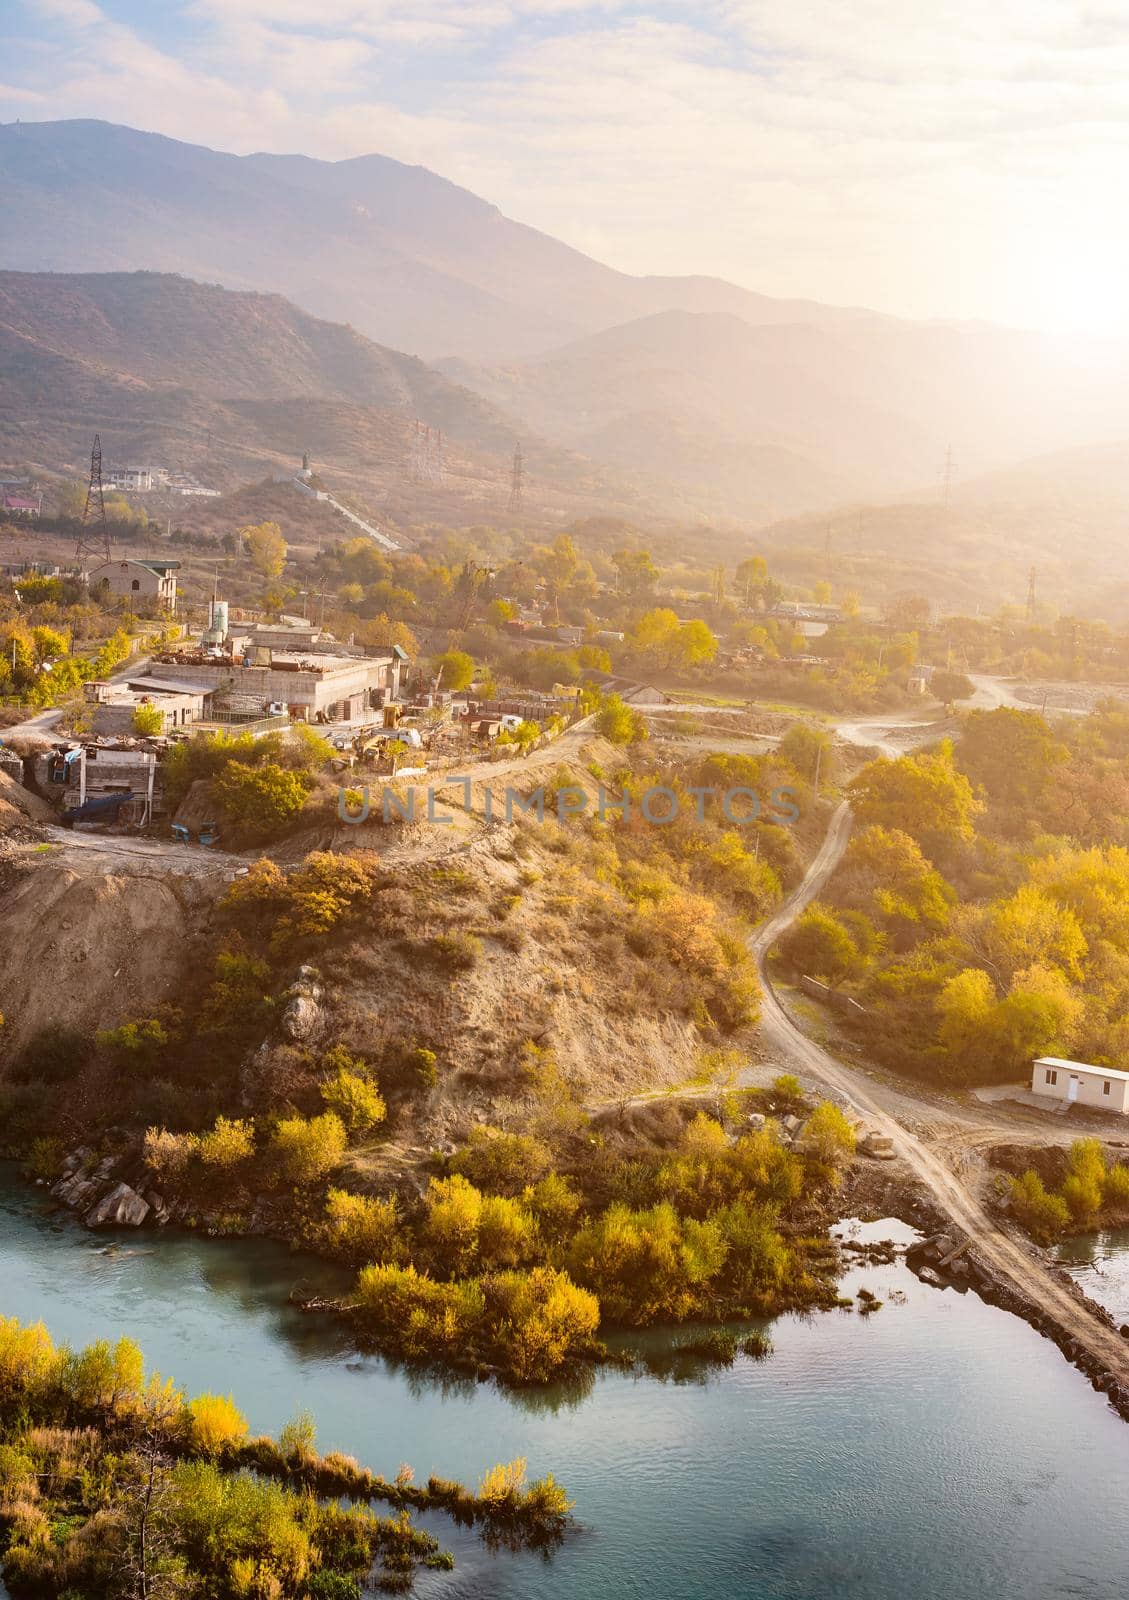 view on mountains, river nearby, aerial shot by GekaSkr